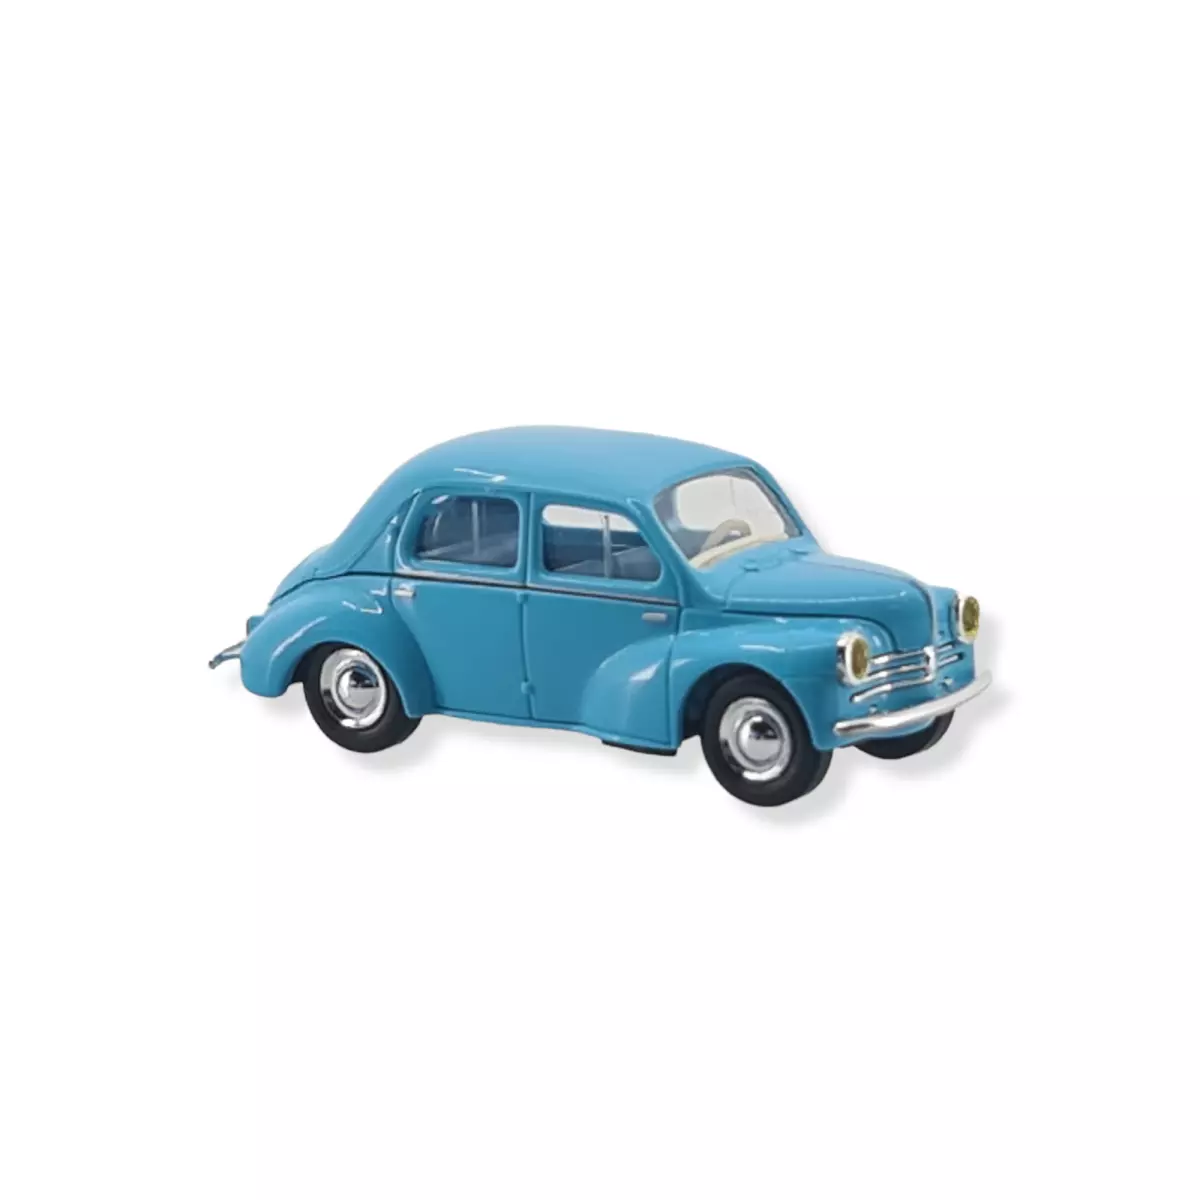 Renault 4 CV blue livery with yellow headlights Busch 46519 - HO : 1/87 - EP III